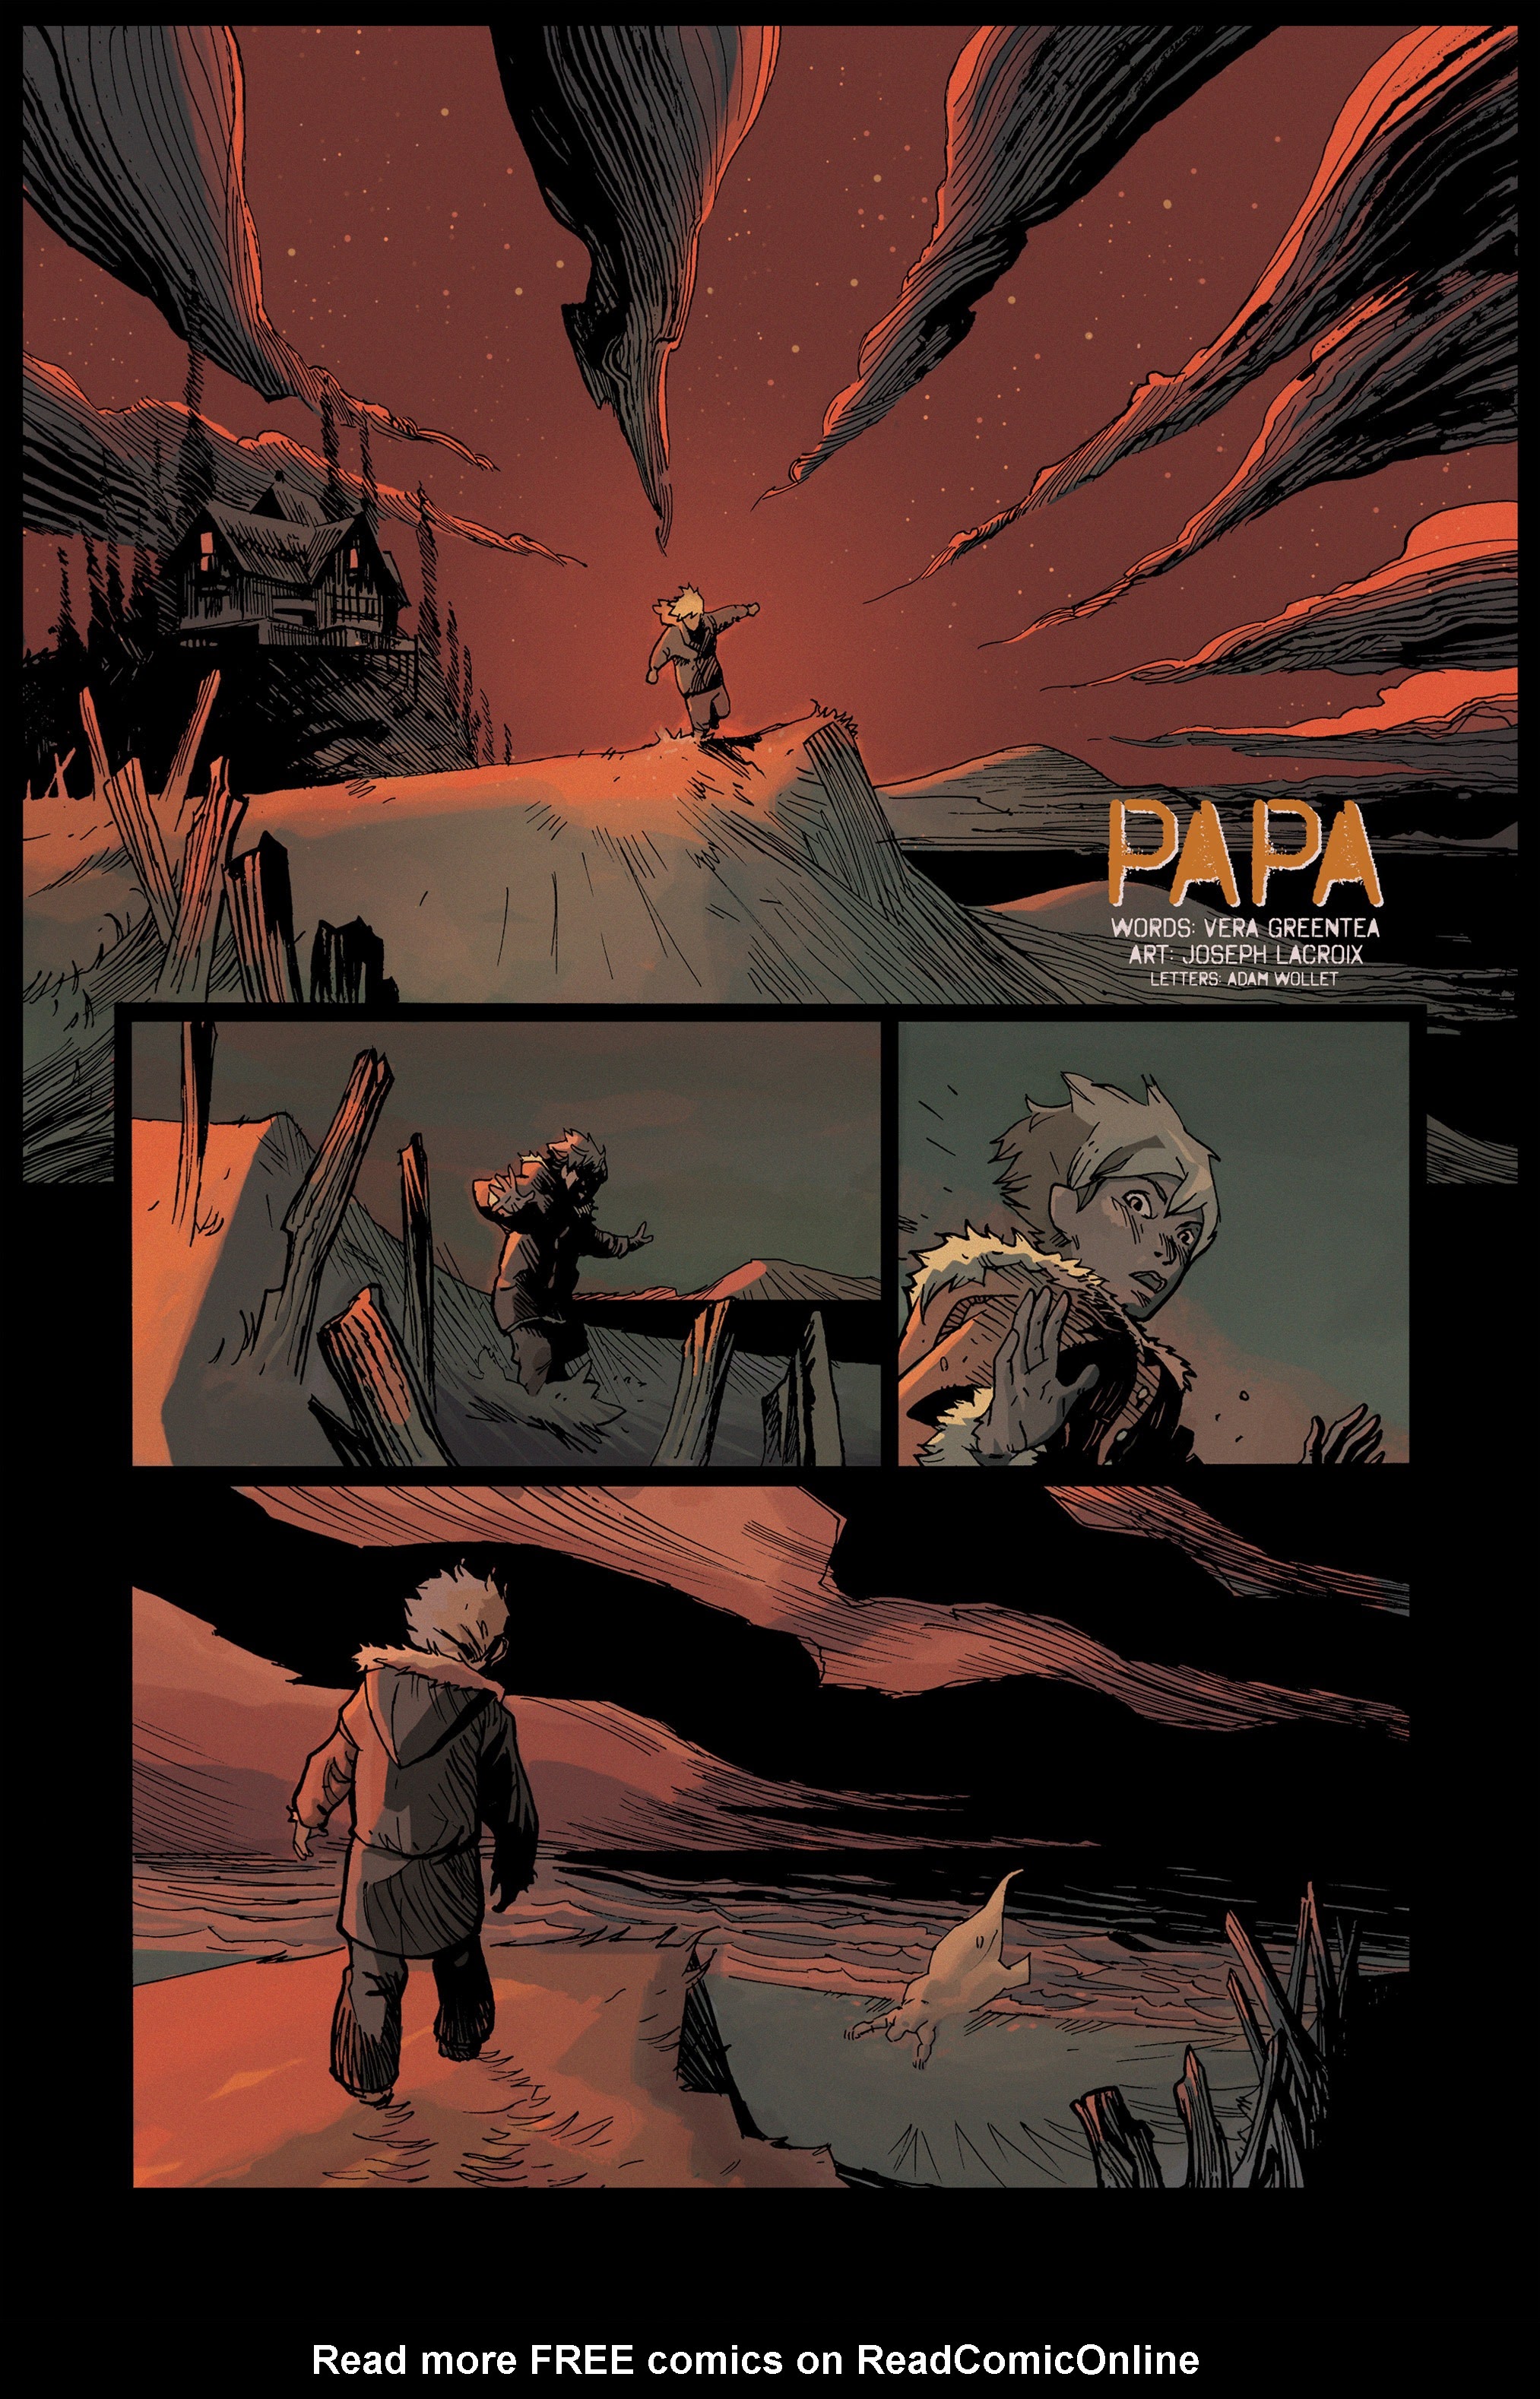 Read online Papa comic -  Issue # Full - 4